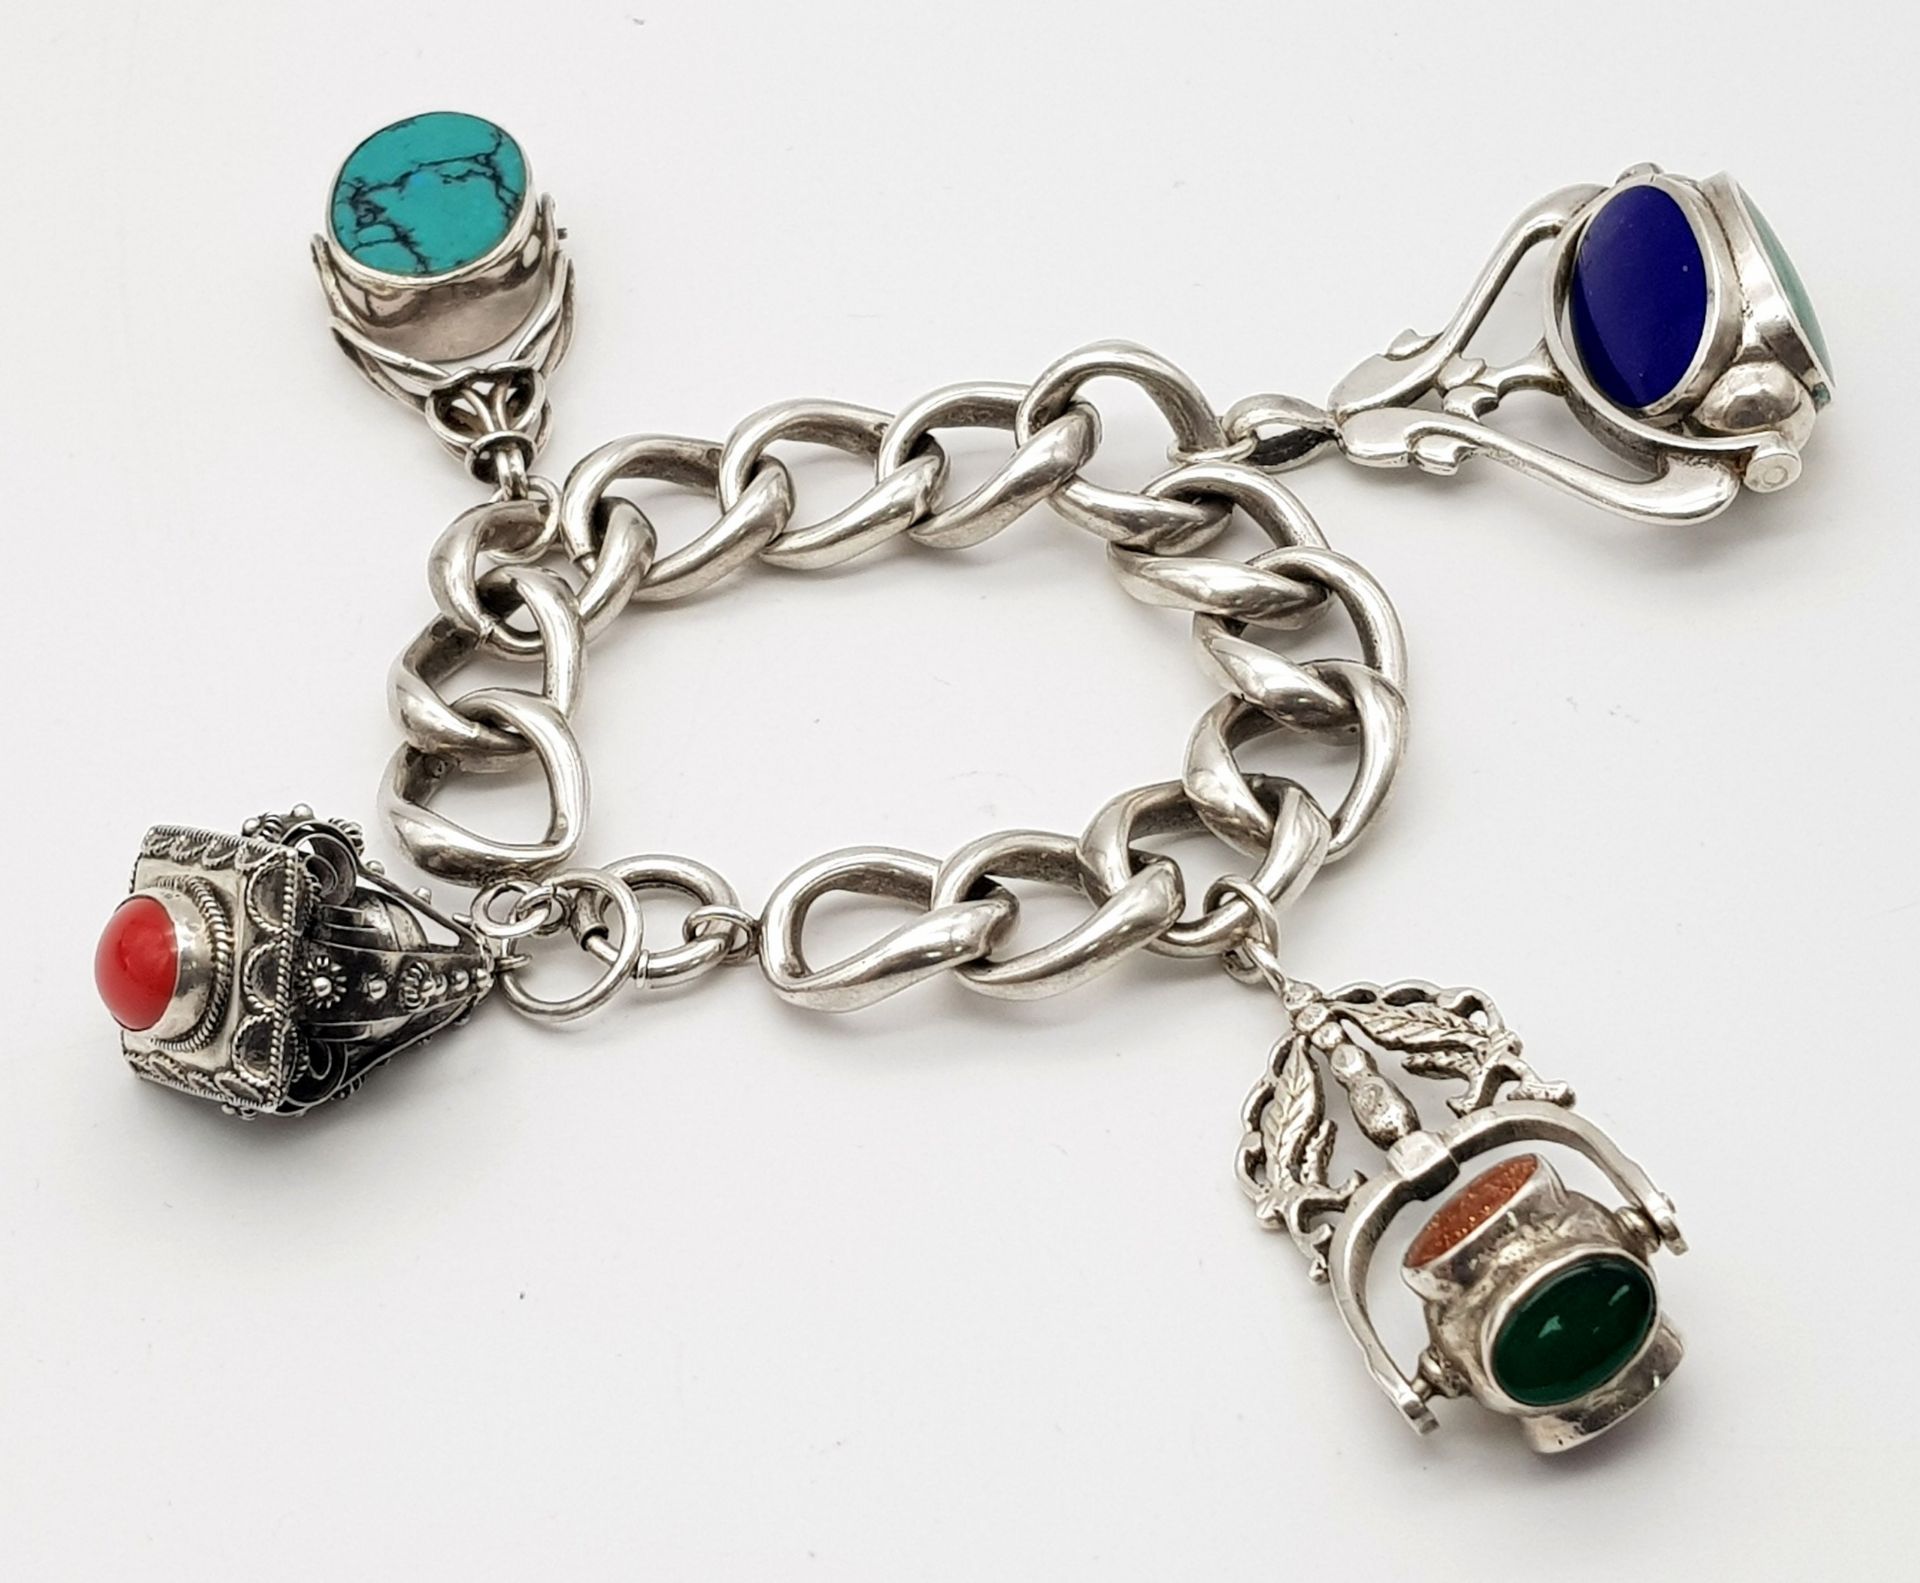 AN UNUSUAL SILVER CHARM BRACELET WITH LARGE STONE SET CHARMS (SEE PHOTO) 90.6gms